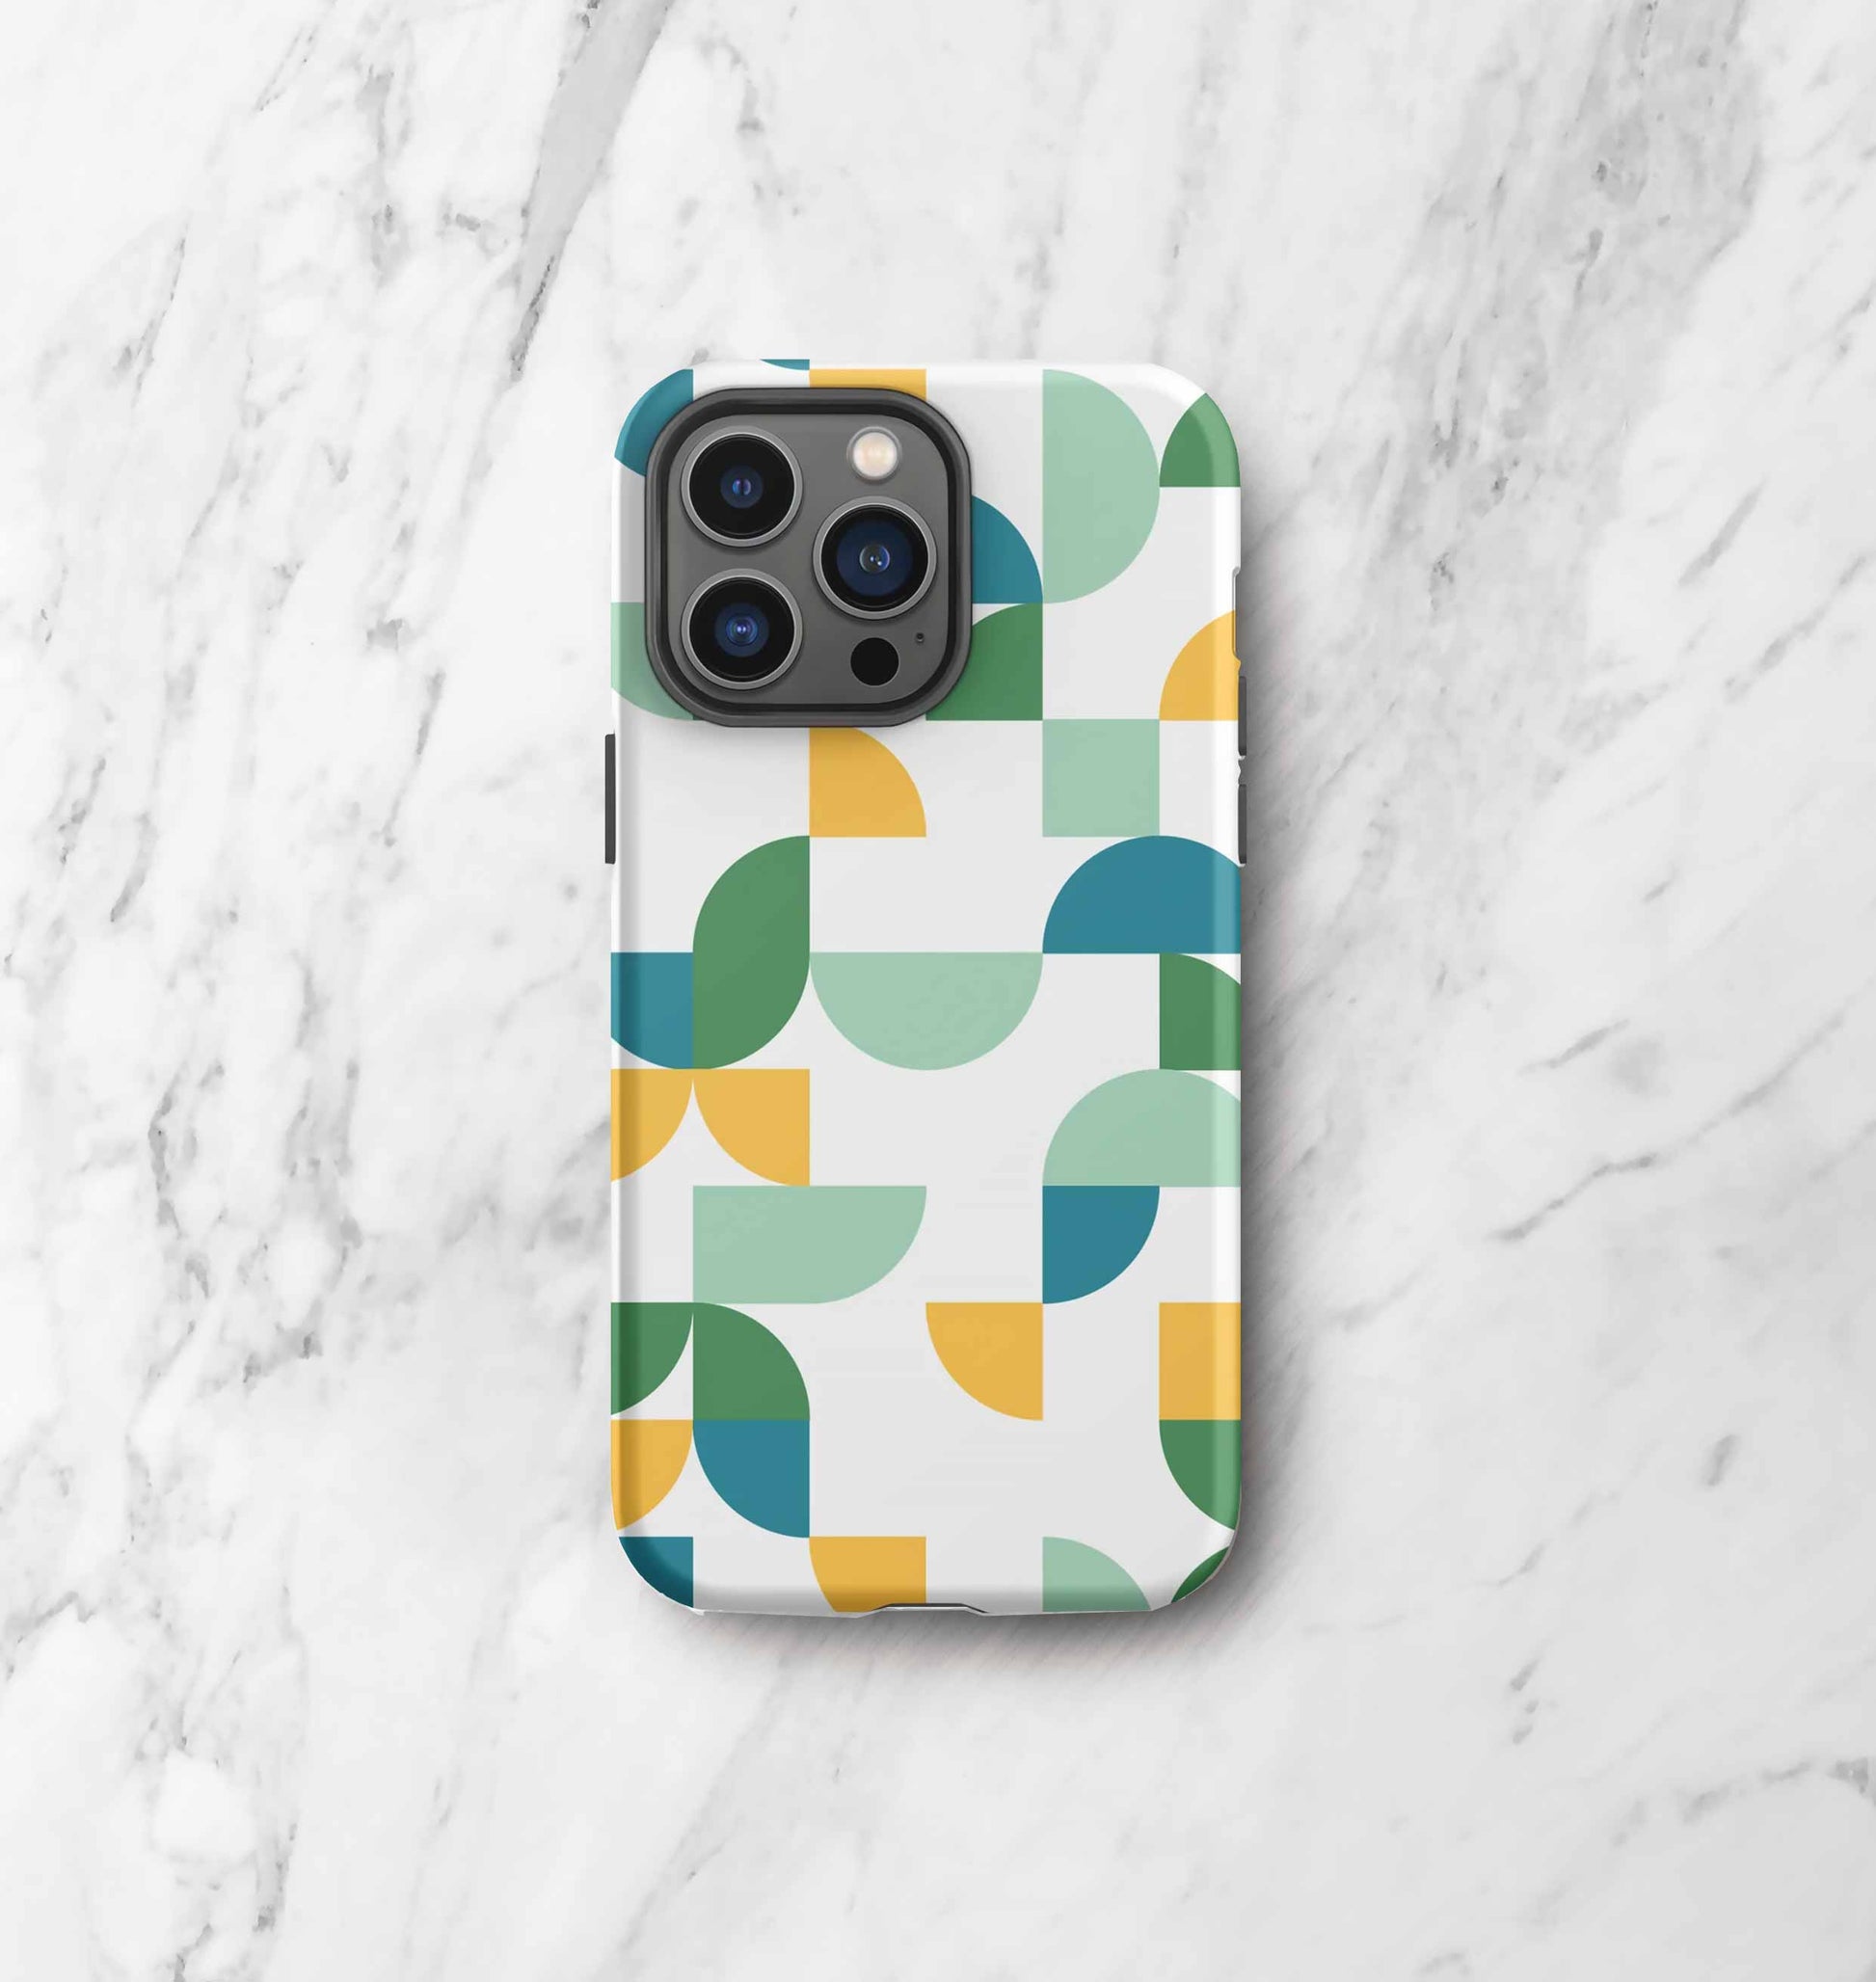 Front view of iPhone tough case in Geometria I Midday design on a marble countertop